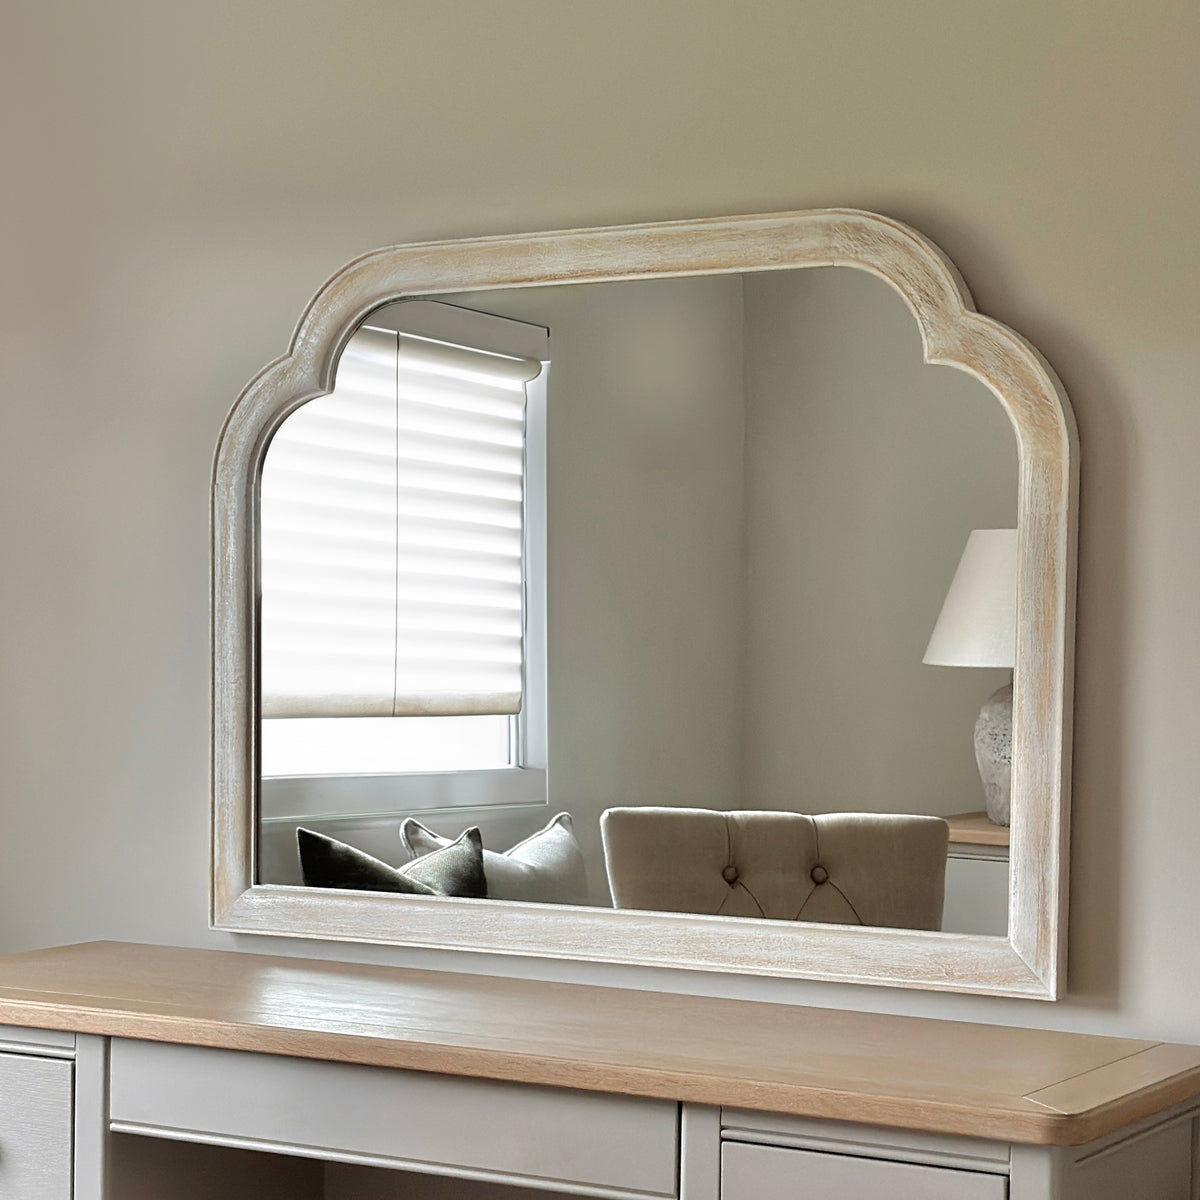 Elena - White Washed Wood Arched Overmantle Mirror 100cm x 75cm